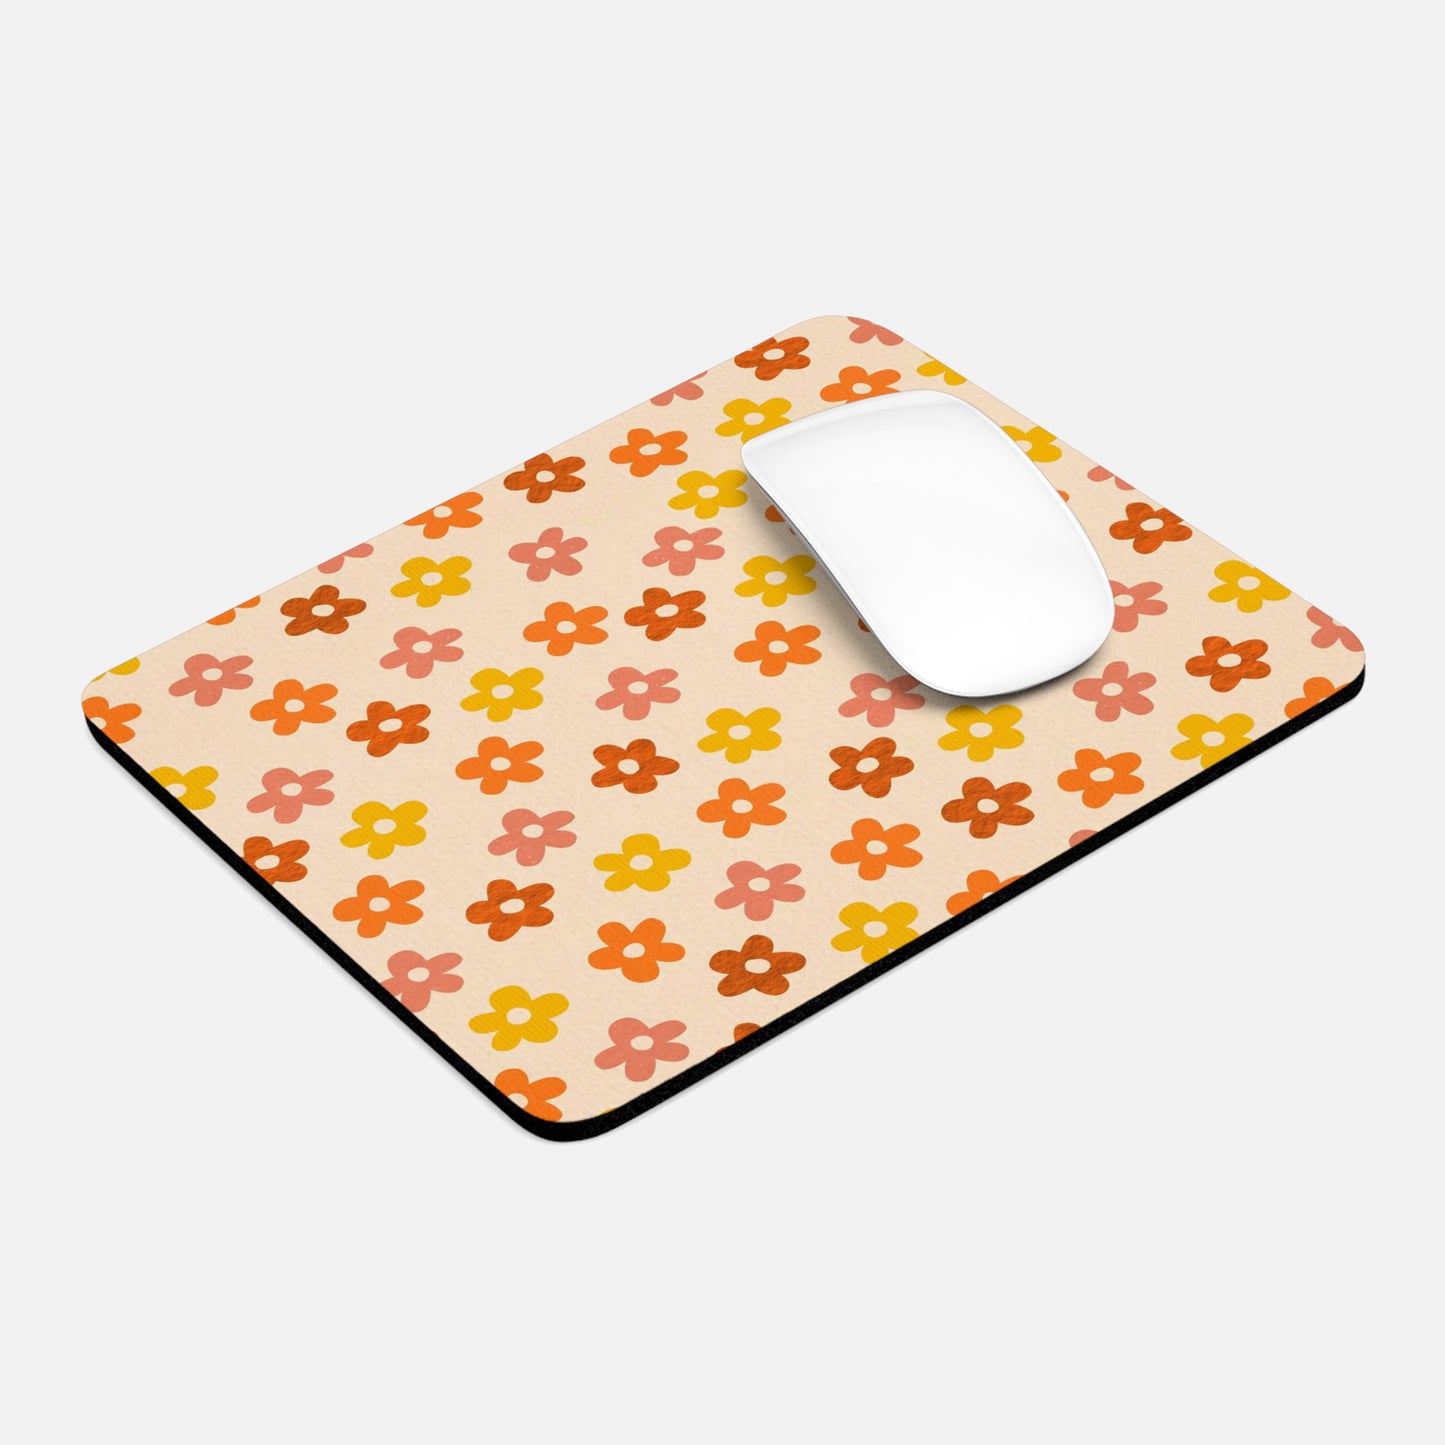 Retro Flowers Groovy Mouse Pad